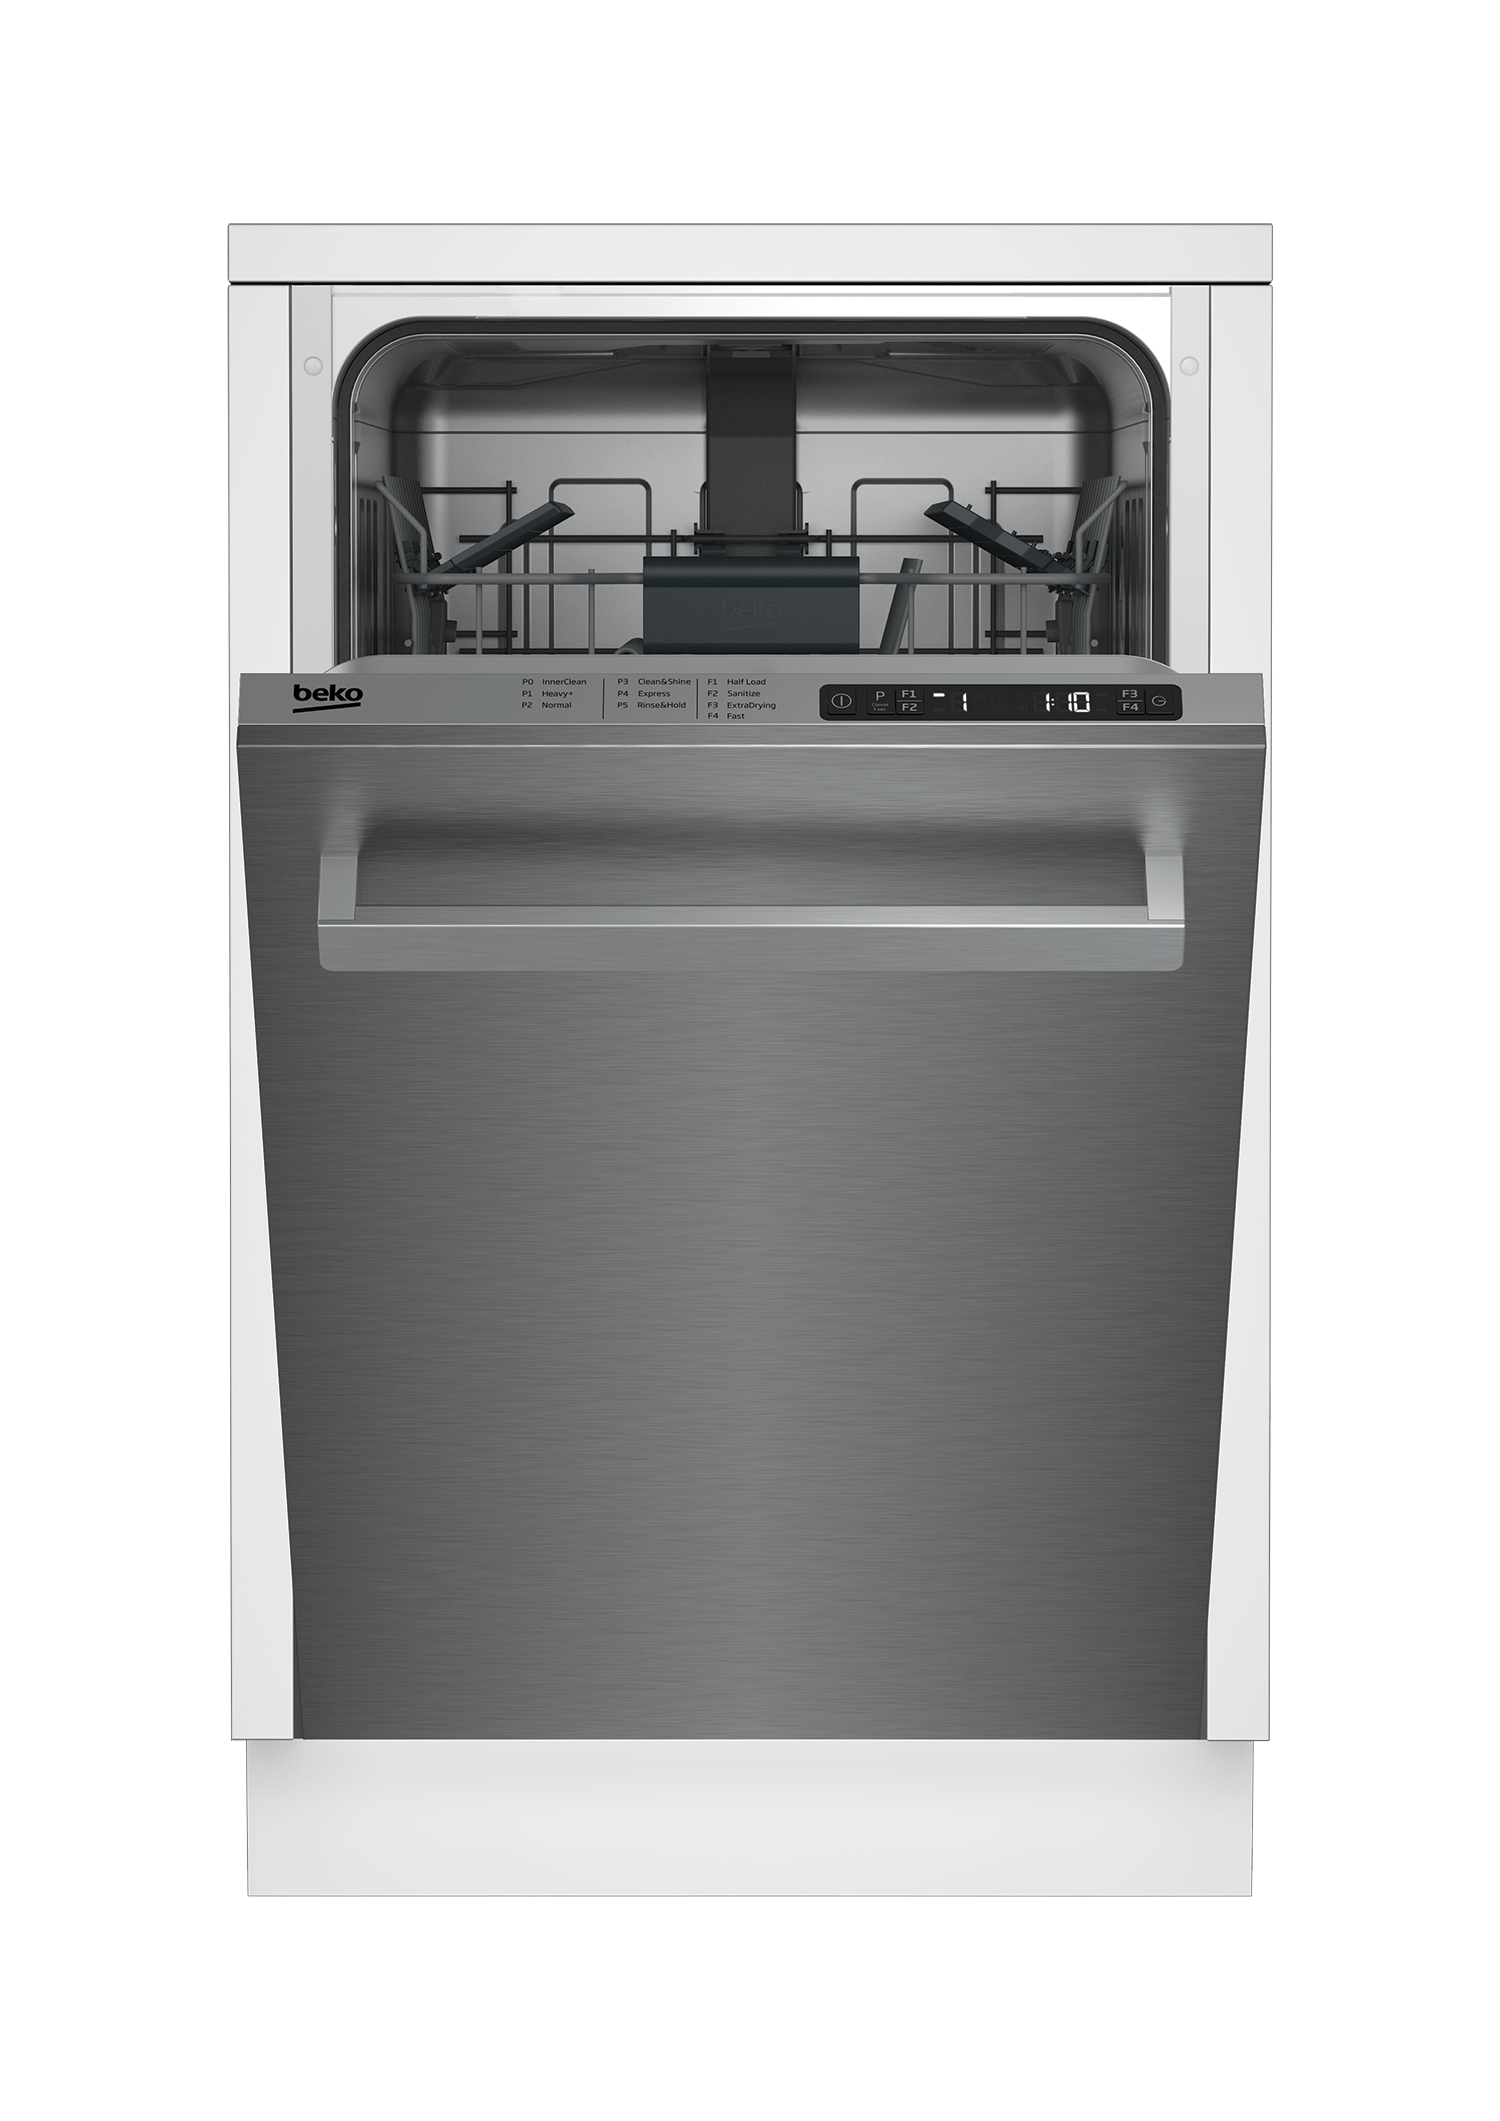 Beko Slim Size Stainless Dishwasher, 8 place settings, 48 dBa, Top Control